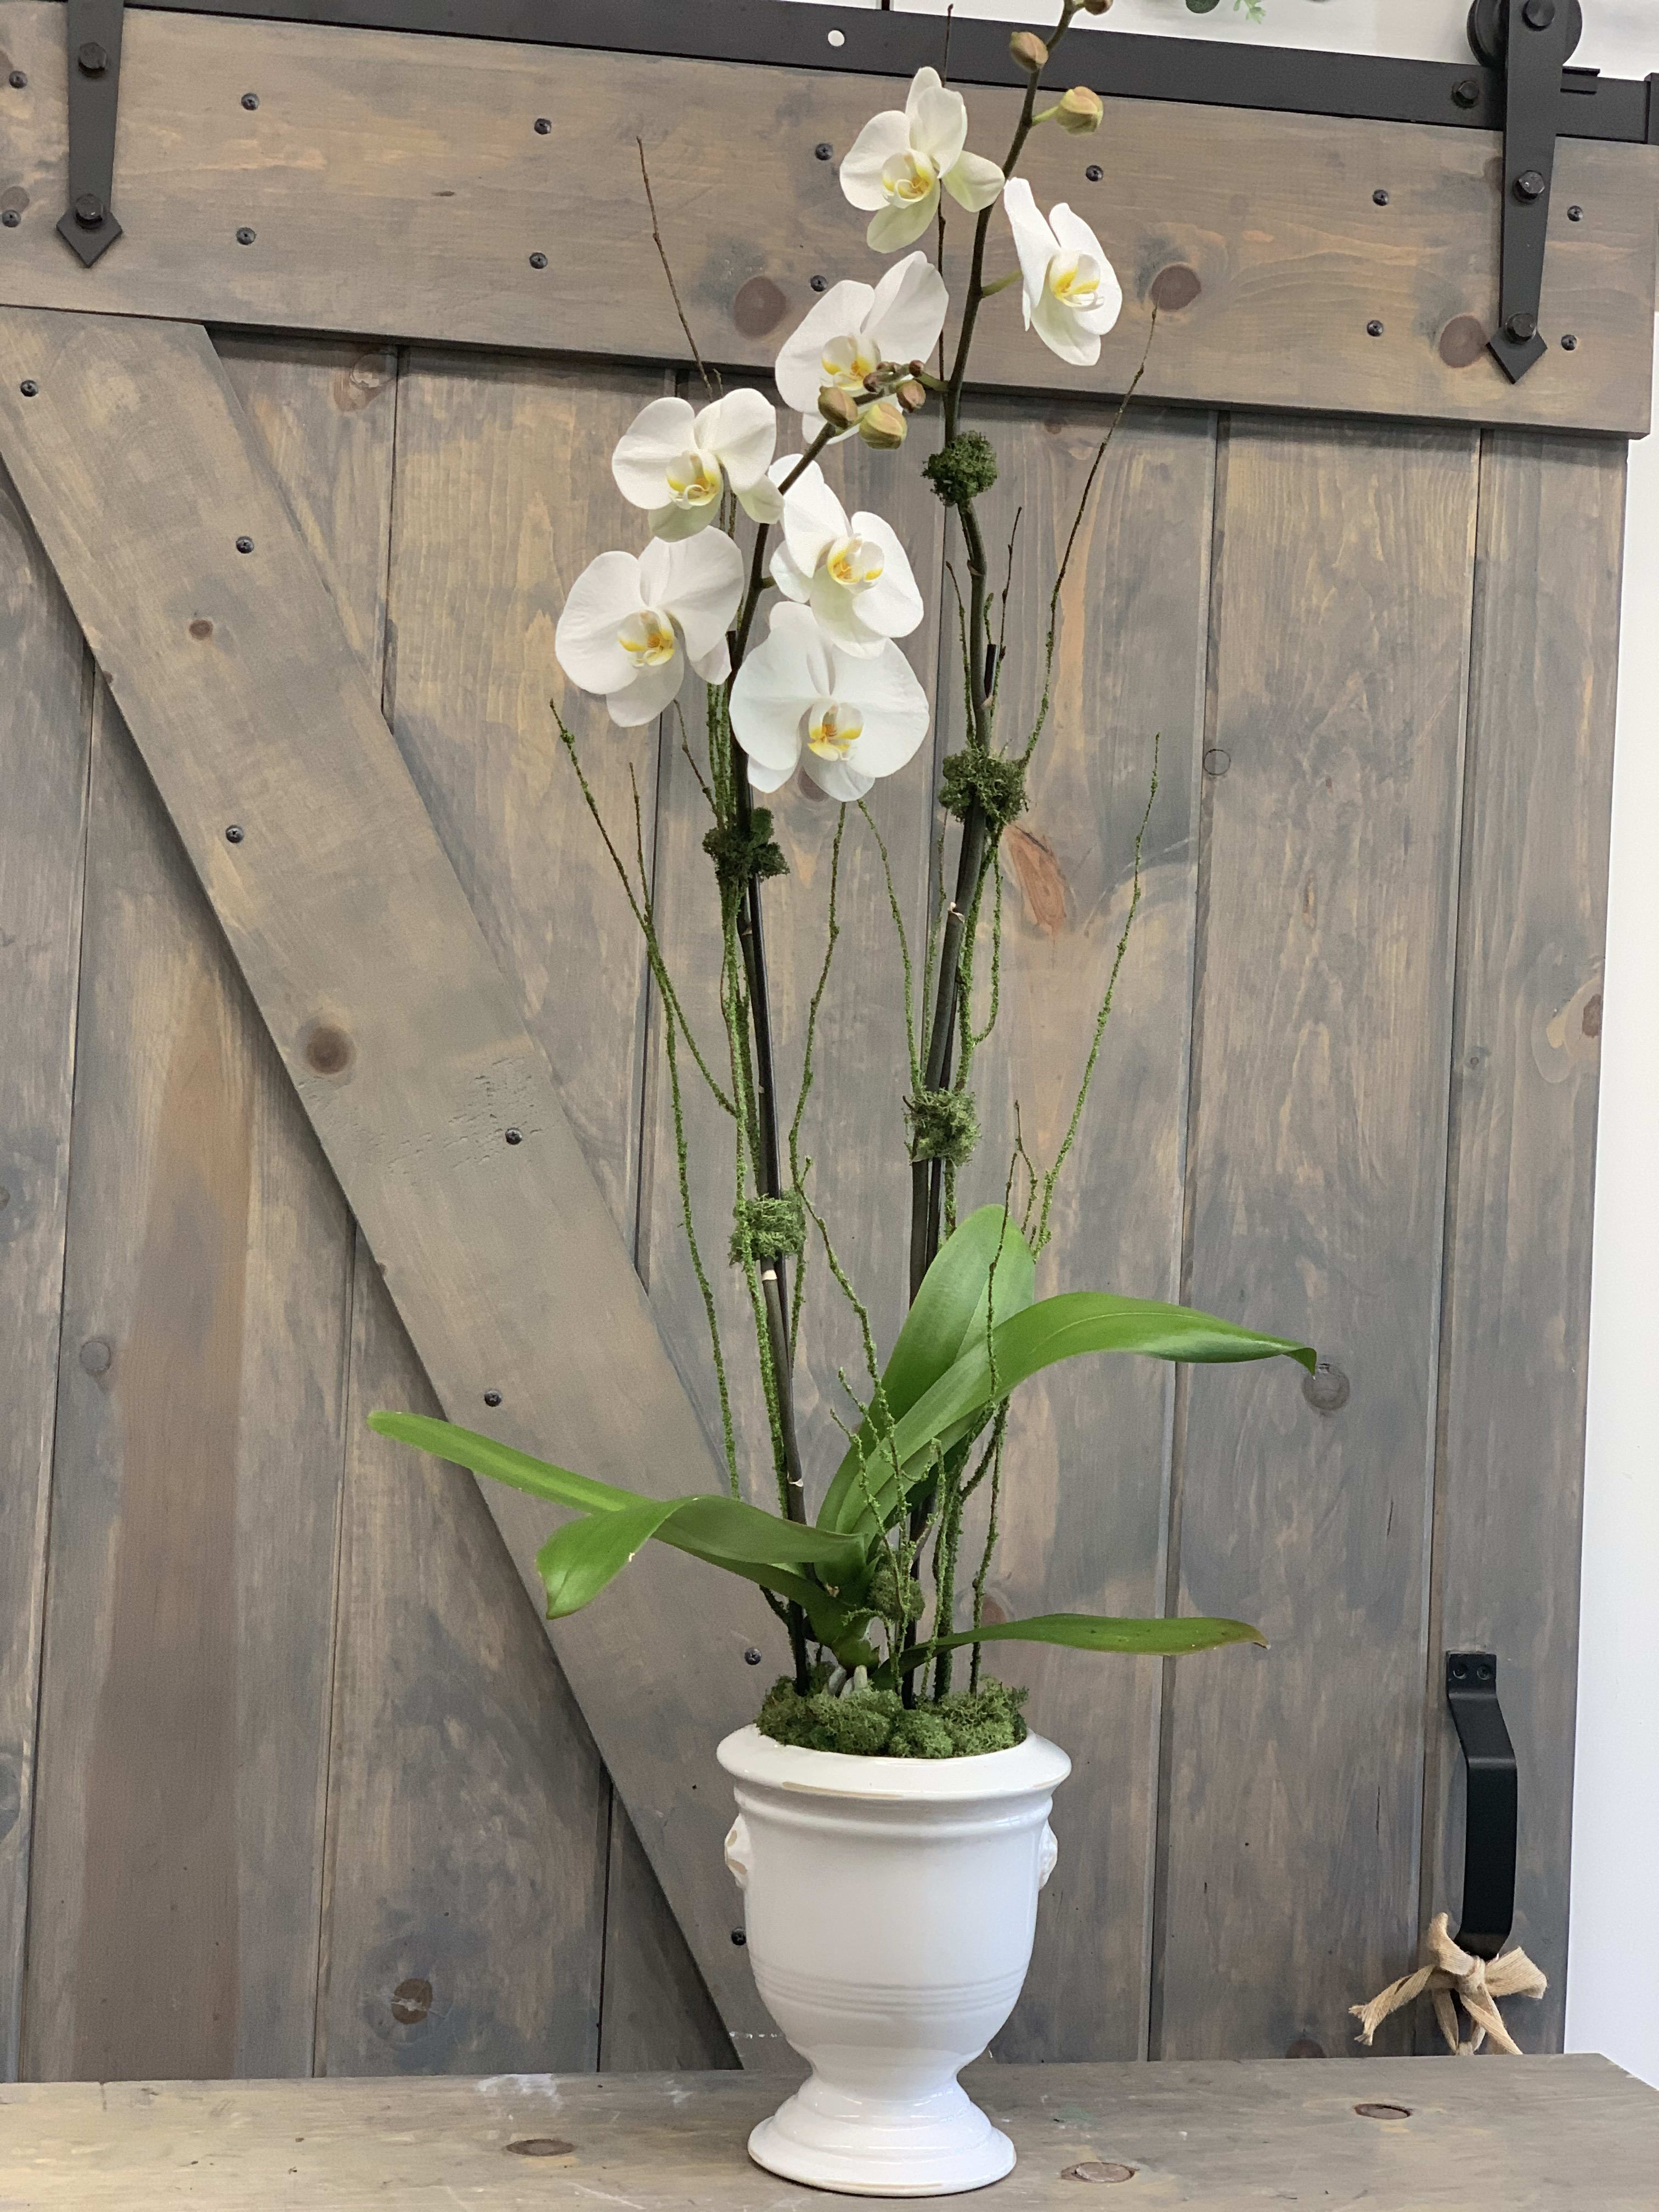 Double-Spiked Orchid - A stunning double-spiked white phalaenopsis orchid in a white ceramic, adorned with branches and a satin bow.